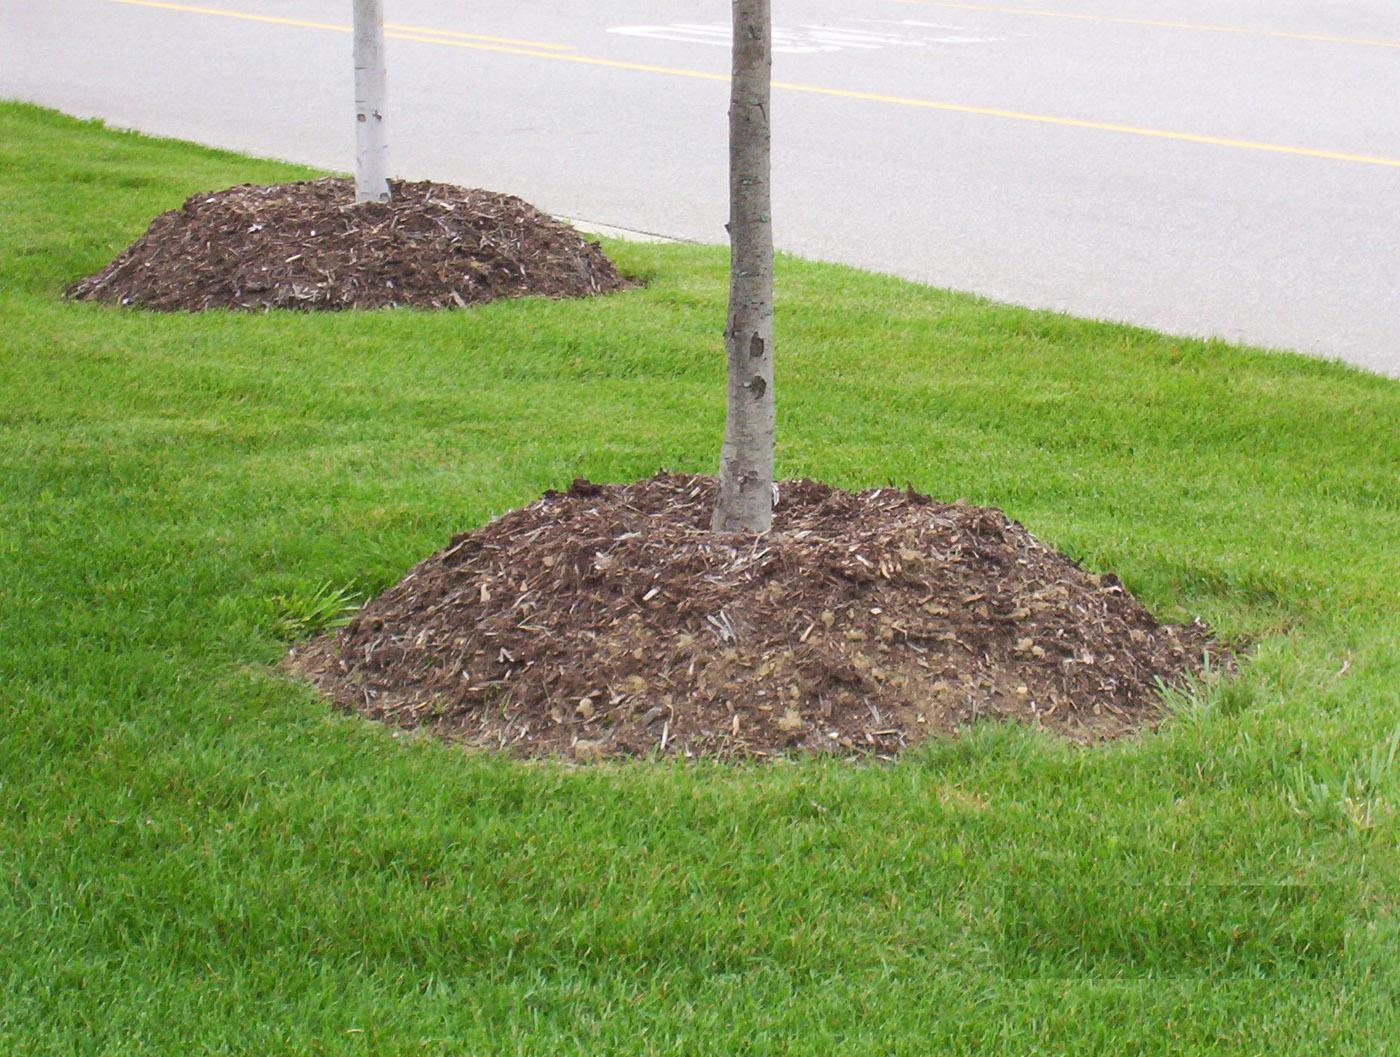 Typical mulch volcanoes have been formed high around the base and trunk of these trees. This thick layer of mulch is bad for the trees and can cause bark decay, root circling, and other problems. (Photo by Gary Bachman)